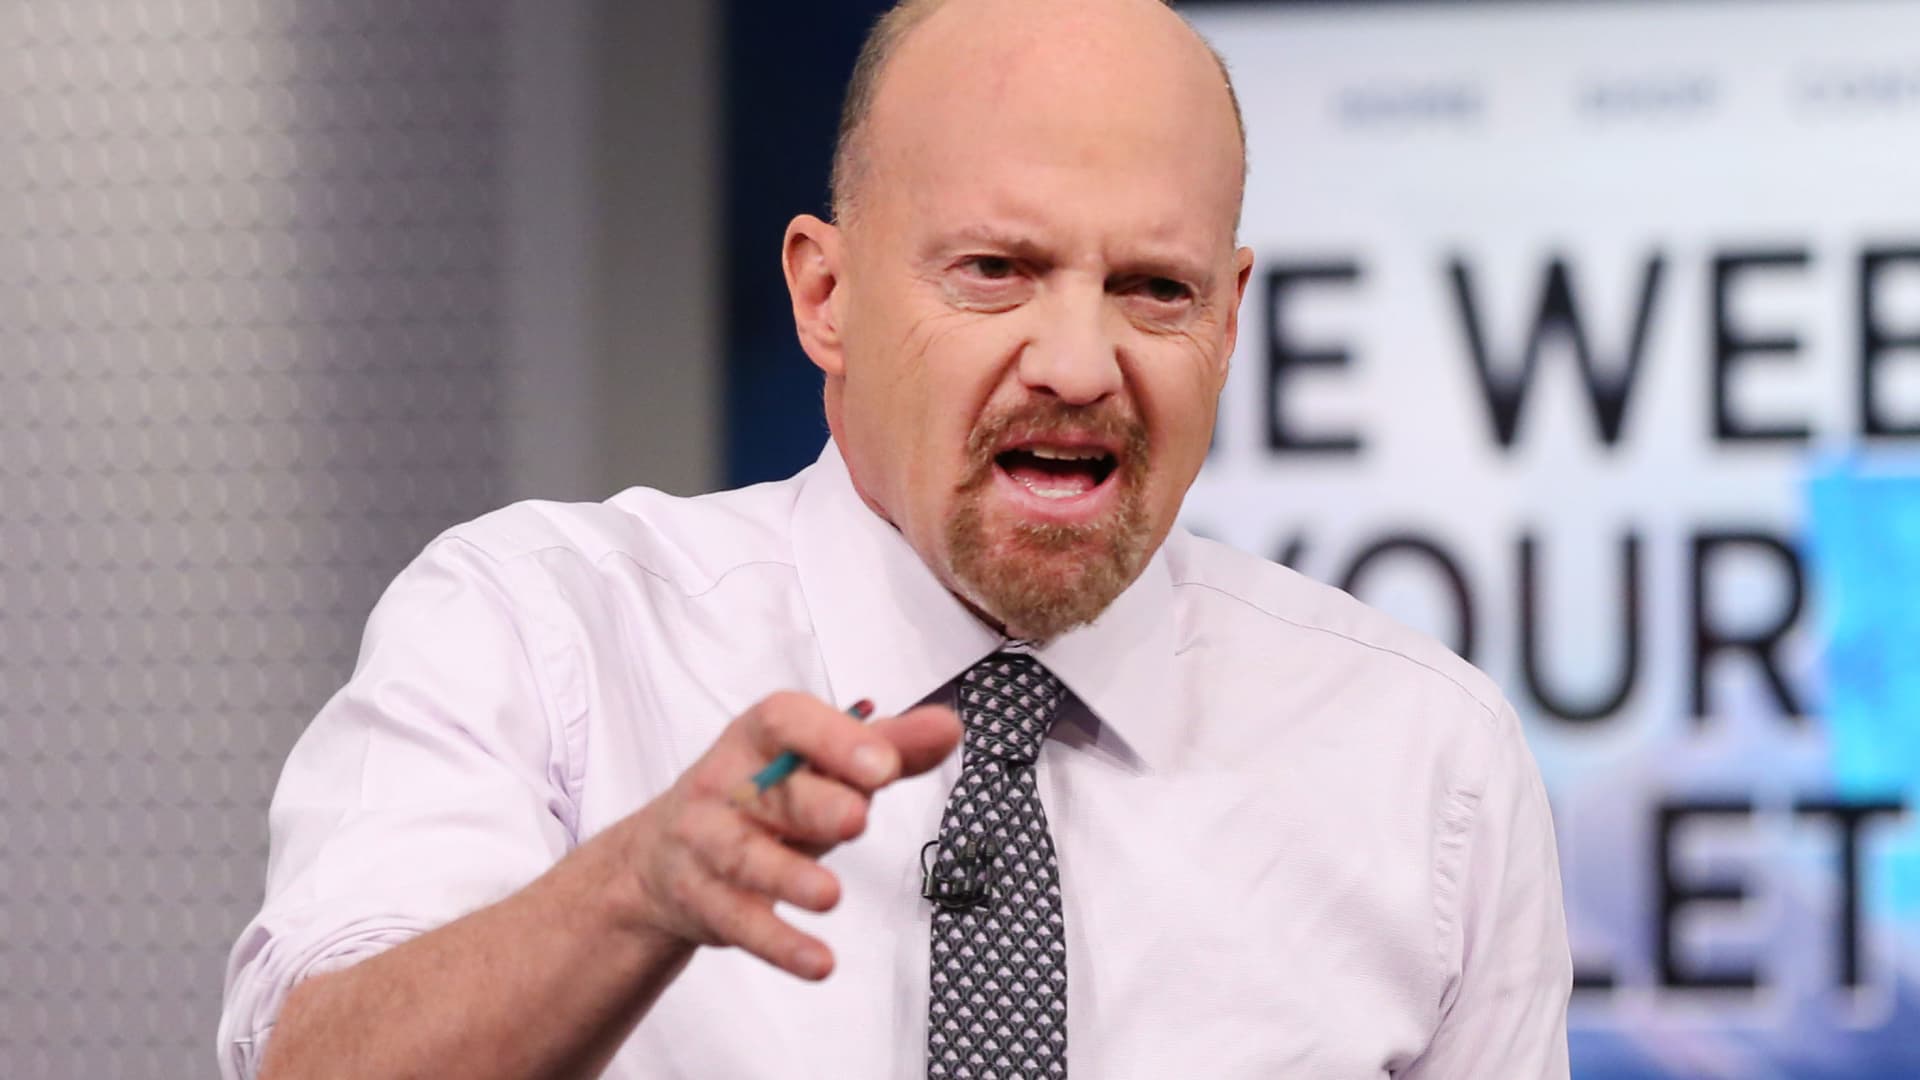 Charts suggest ‘it’s going to be a very nice summer’ for stocks, Jim Cramer says